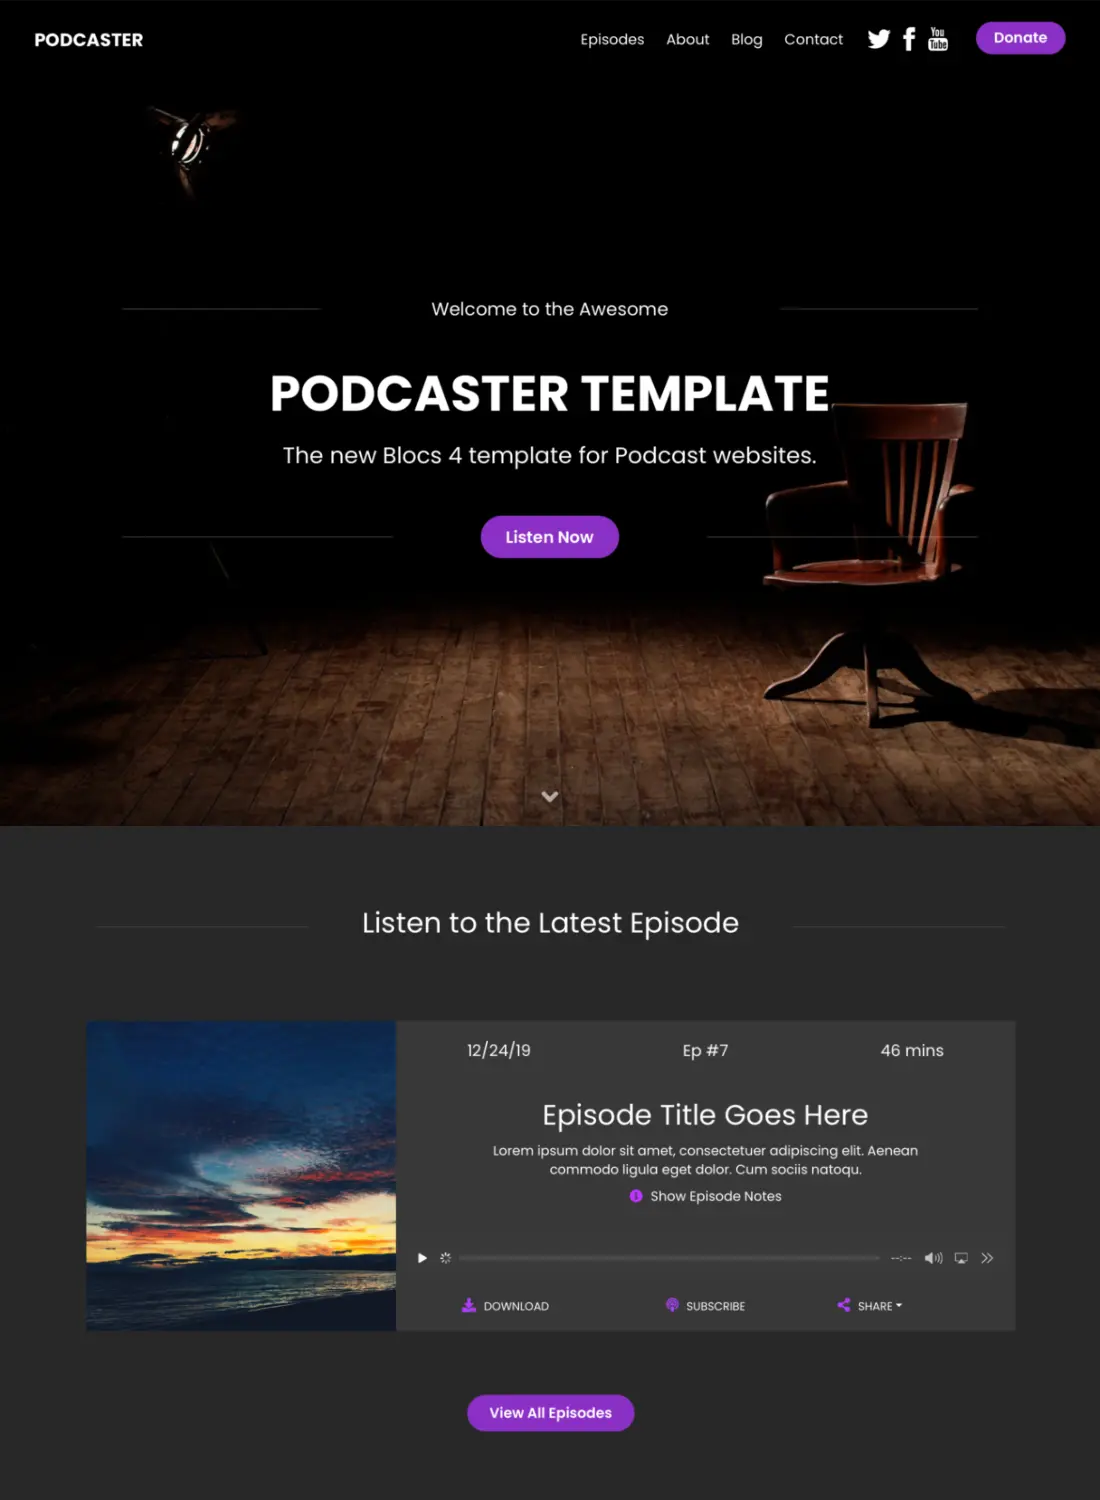 youtuber podcaster premium free template for blocs 5 website builder